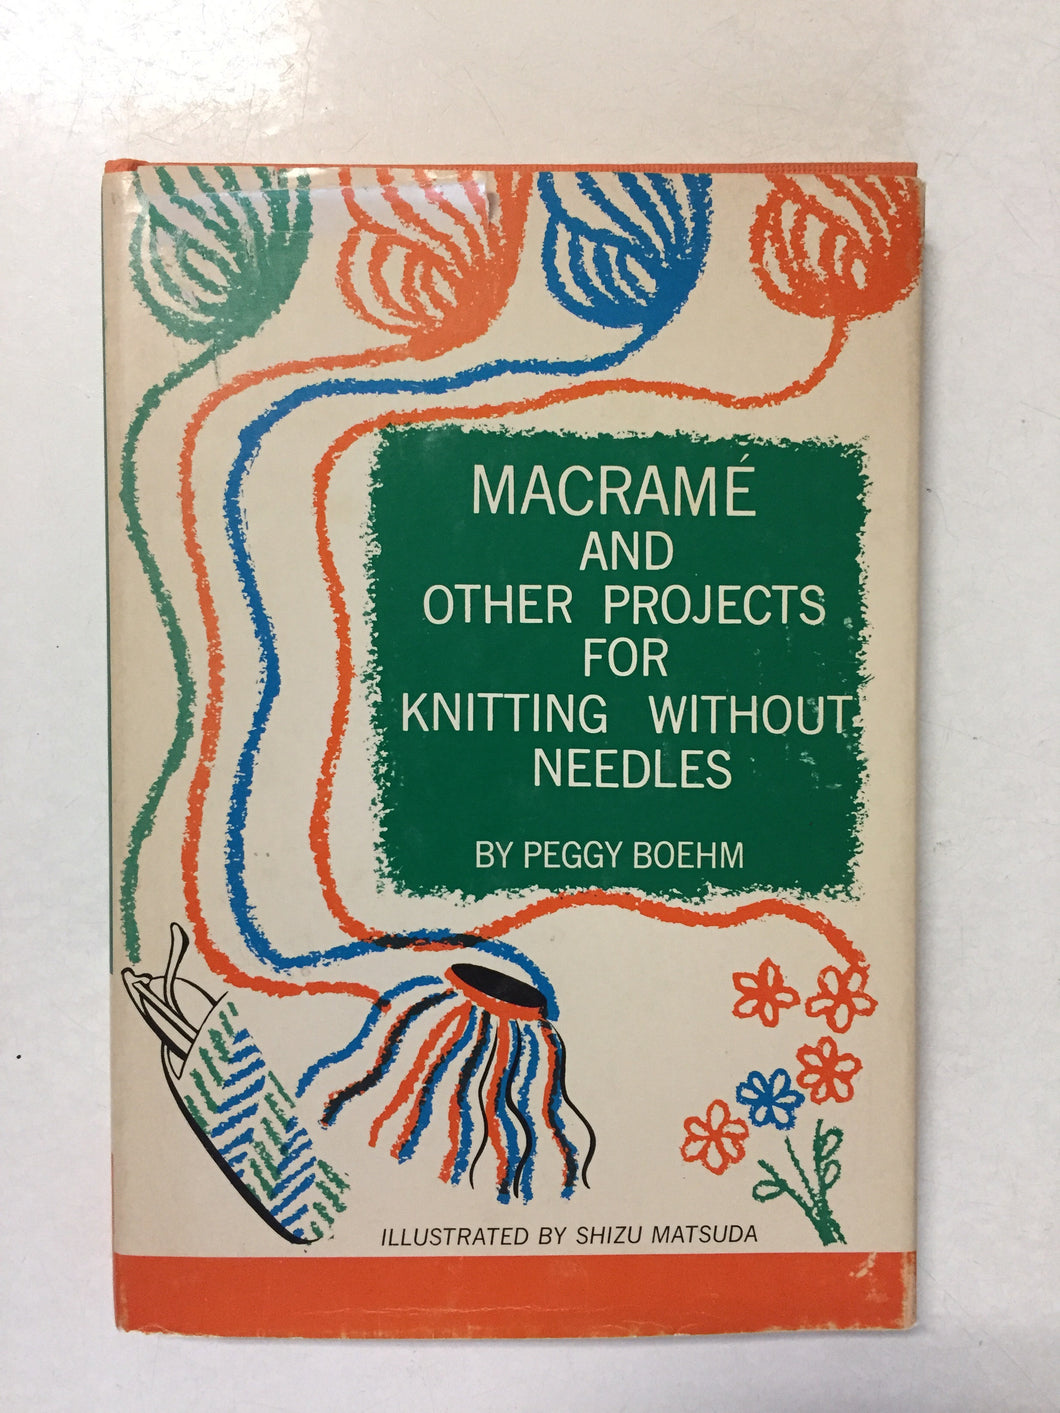 Macreme and Other Projects for Knitting Without Needles - Slick Cat Books 